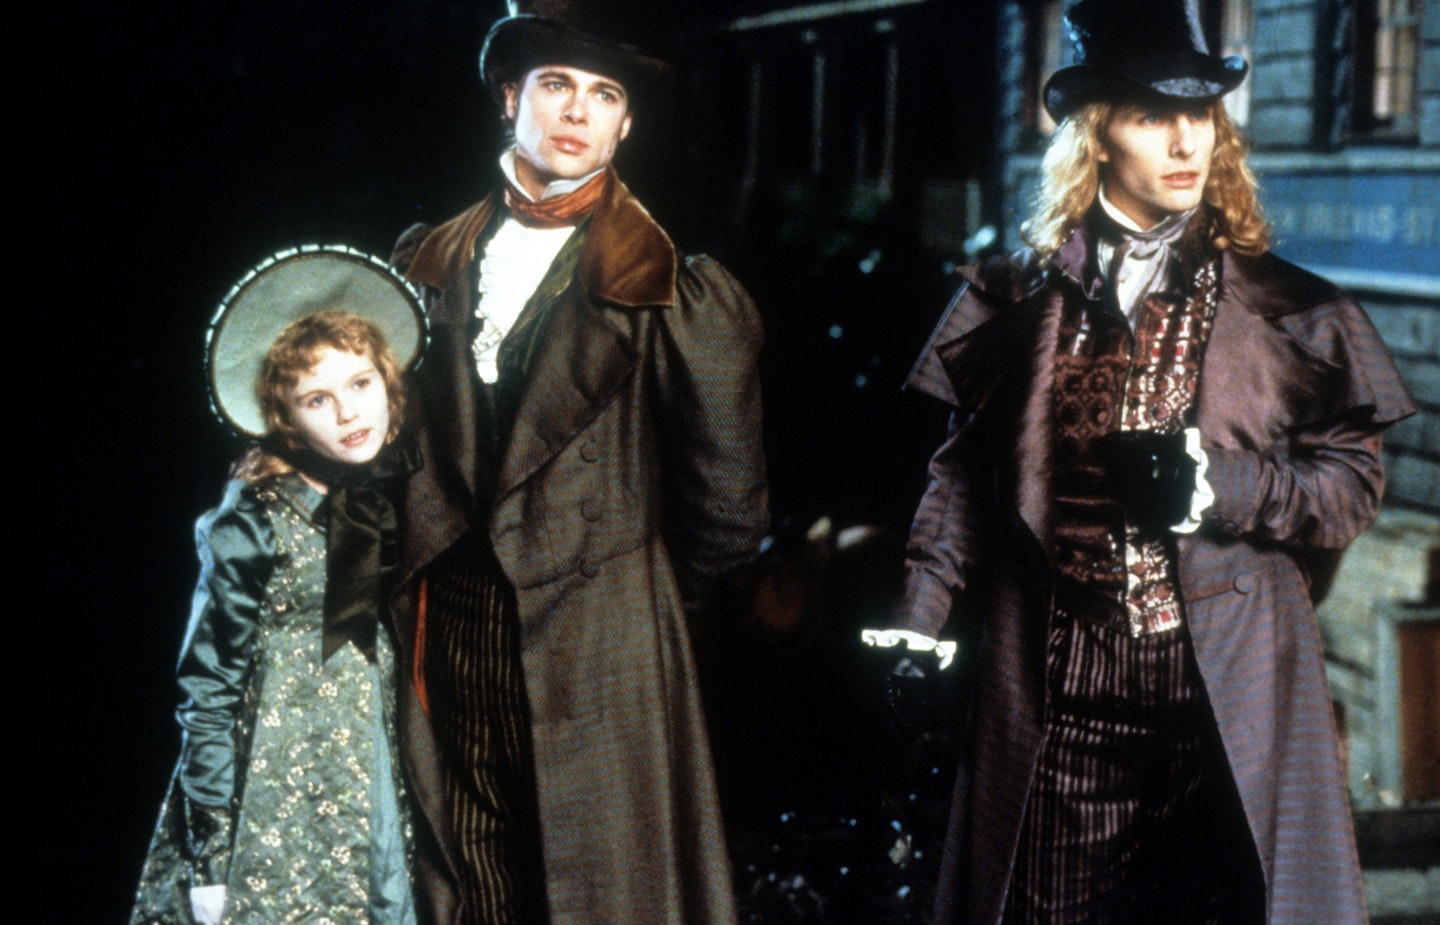 Kirsten Dunst, Brad Pitt and Tom Cruise in a scene from the film 'Interview With The Vampire